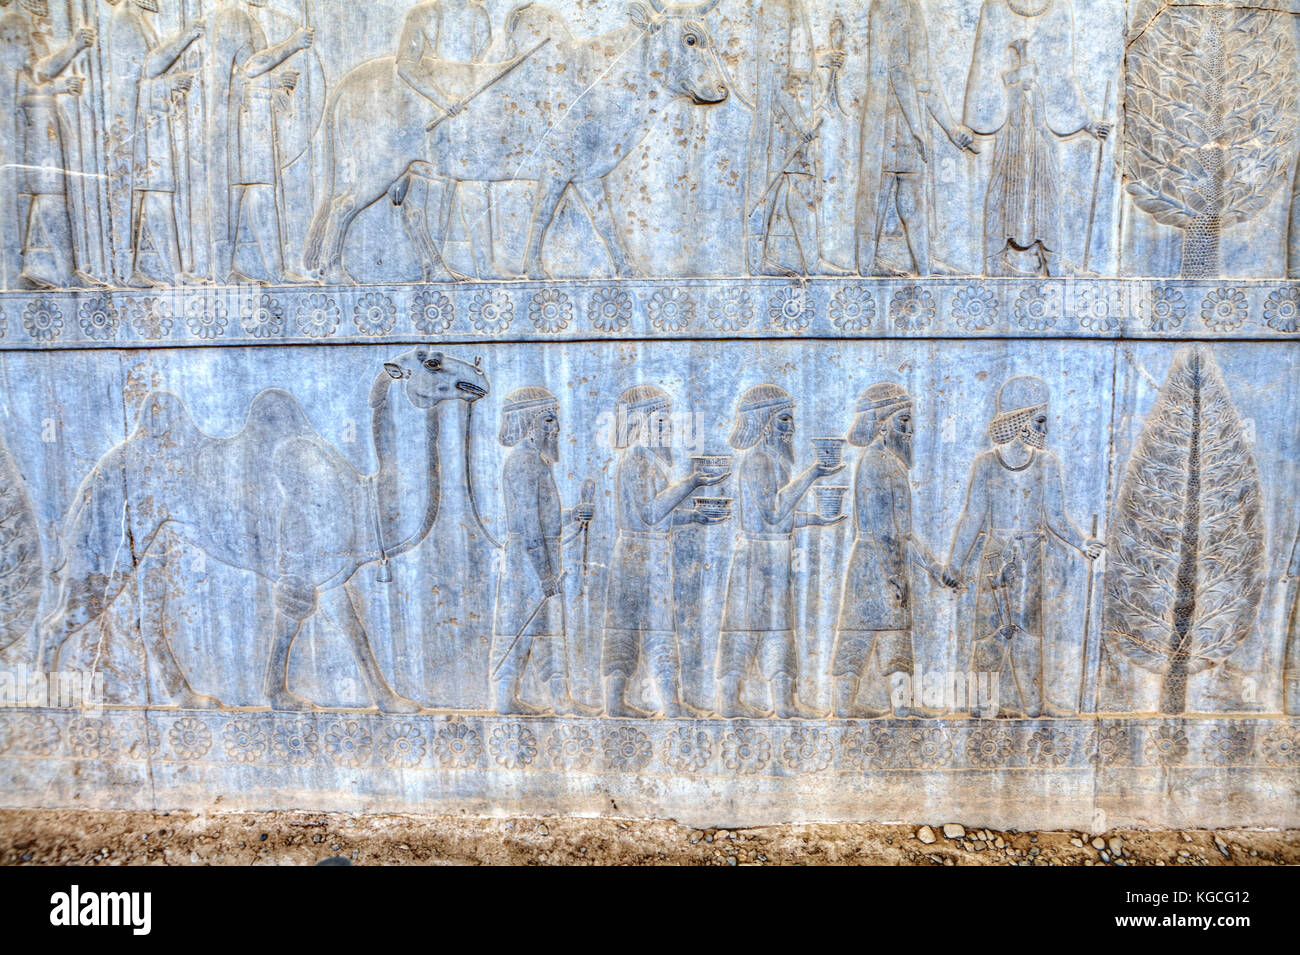 Slaves and soldiers carry gifts for Persian Emperor in Xerxes palace, stone bas-relief in ancient city Persepolis, Iran. Stock Photo